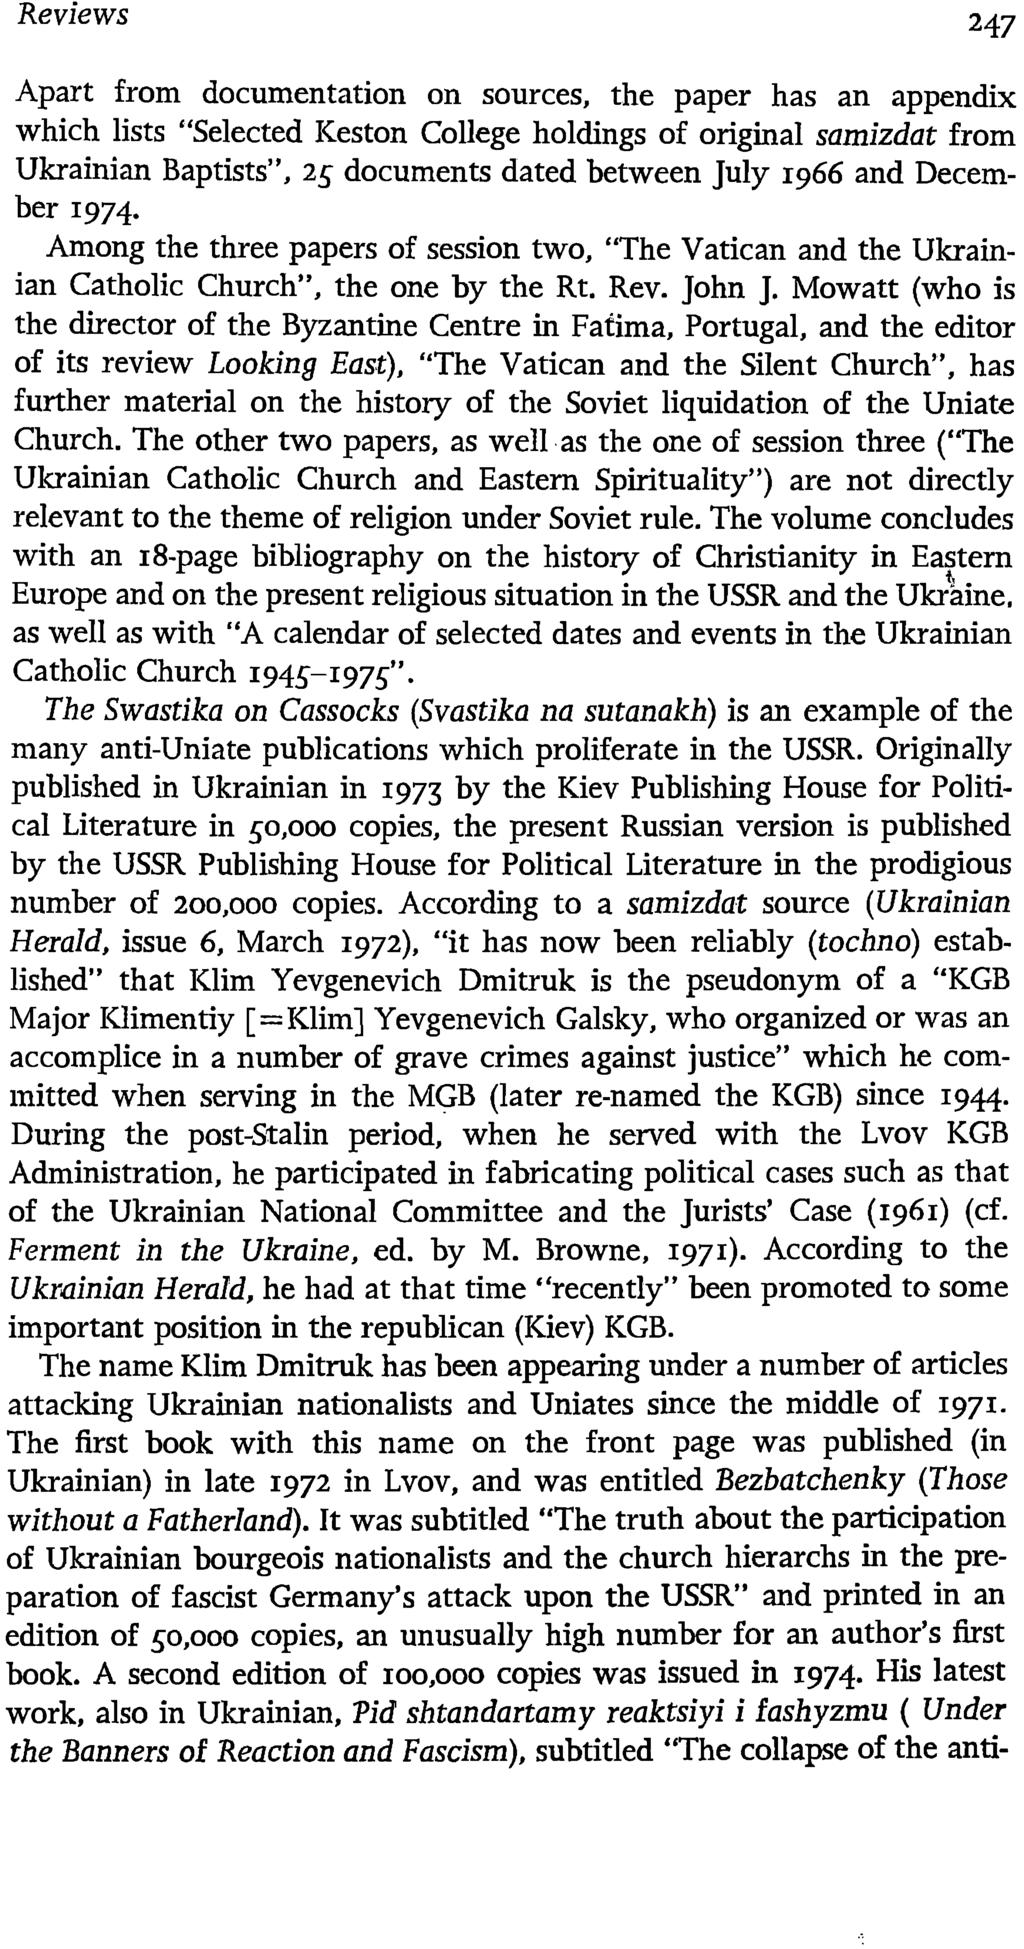 Reviews 247 Apart from documentation on sources, the paper has an appendix which lists "Selected Keston College holdings of original samizdat from Ukrainian Baptists", 25 documents dated between July